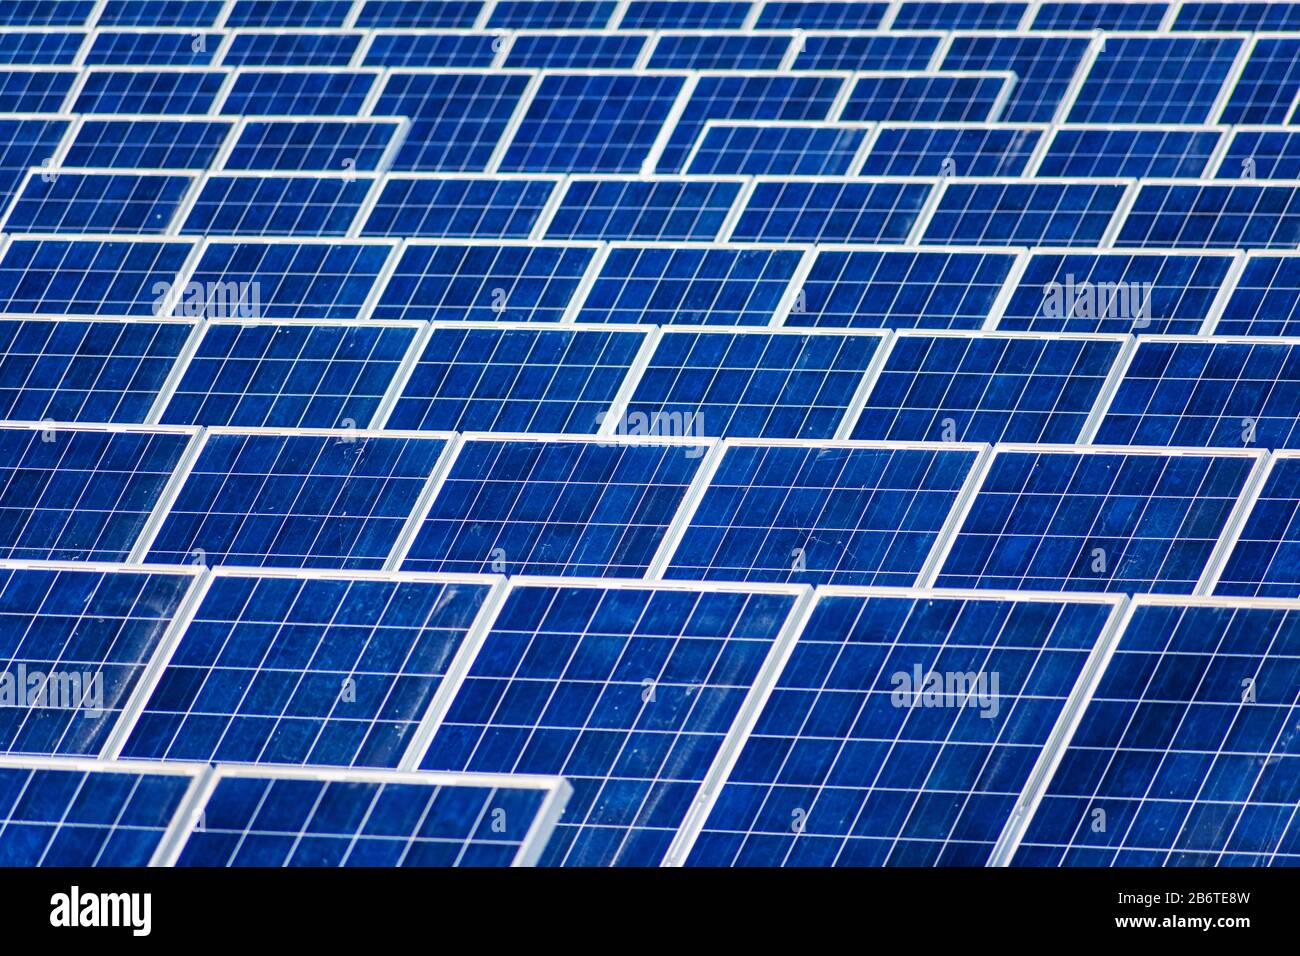 Dusty solar panels surface requires maintenance and cleaning. Solar power electric generating system and facility. Stock Photo